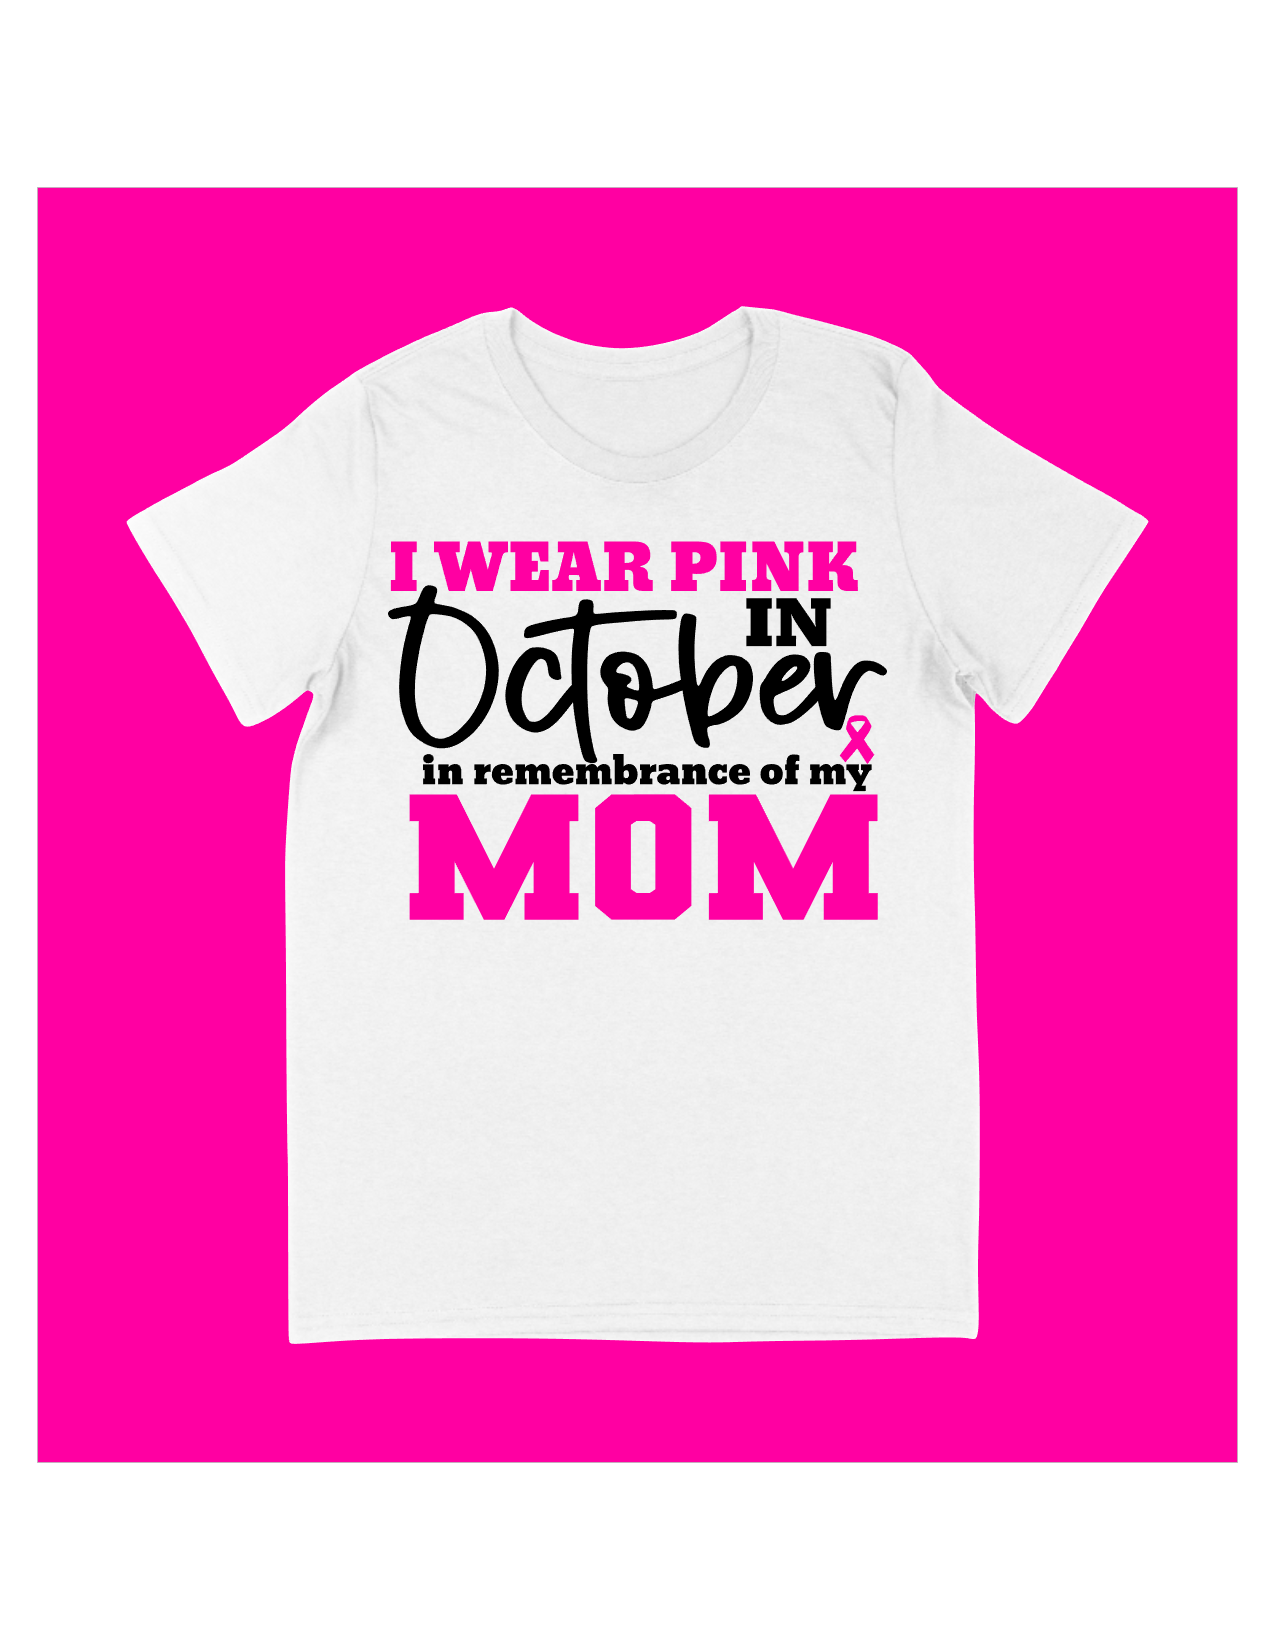 I Wear Pink in Remembrance of Mom - smuniqueshirts